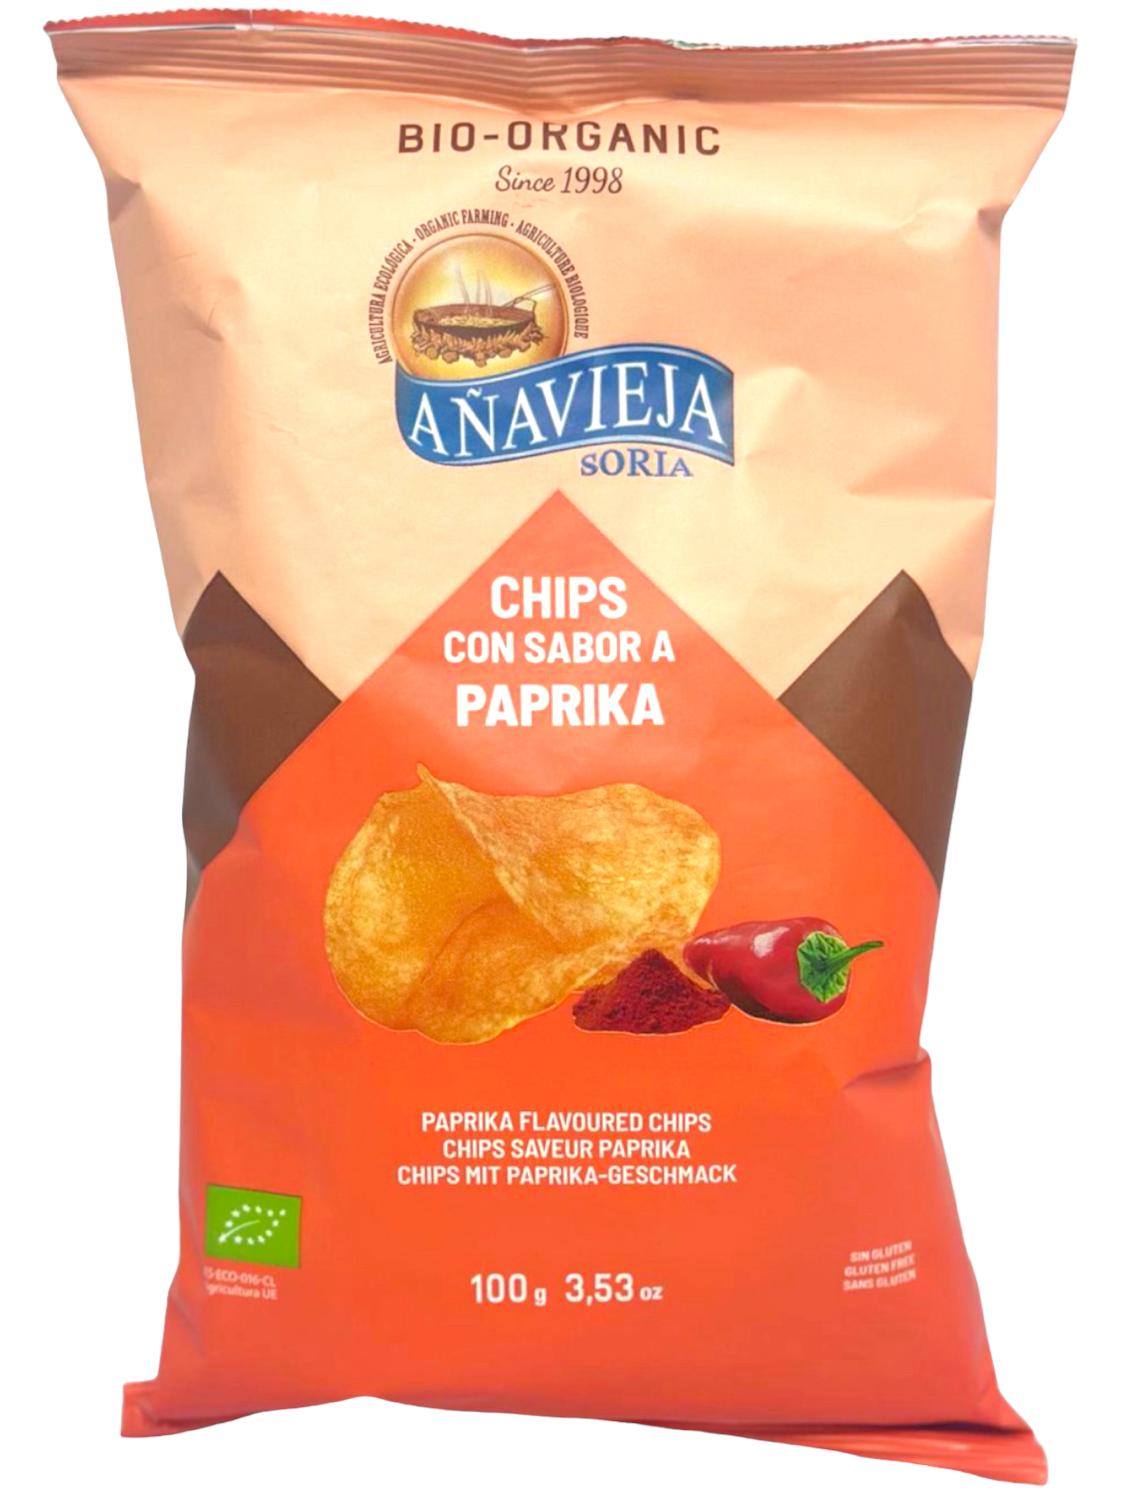 Anavieja Paprika, Inessence Chorizo and Jamon Flavoured Chips- Mix Pack of 3 350g total